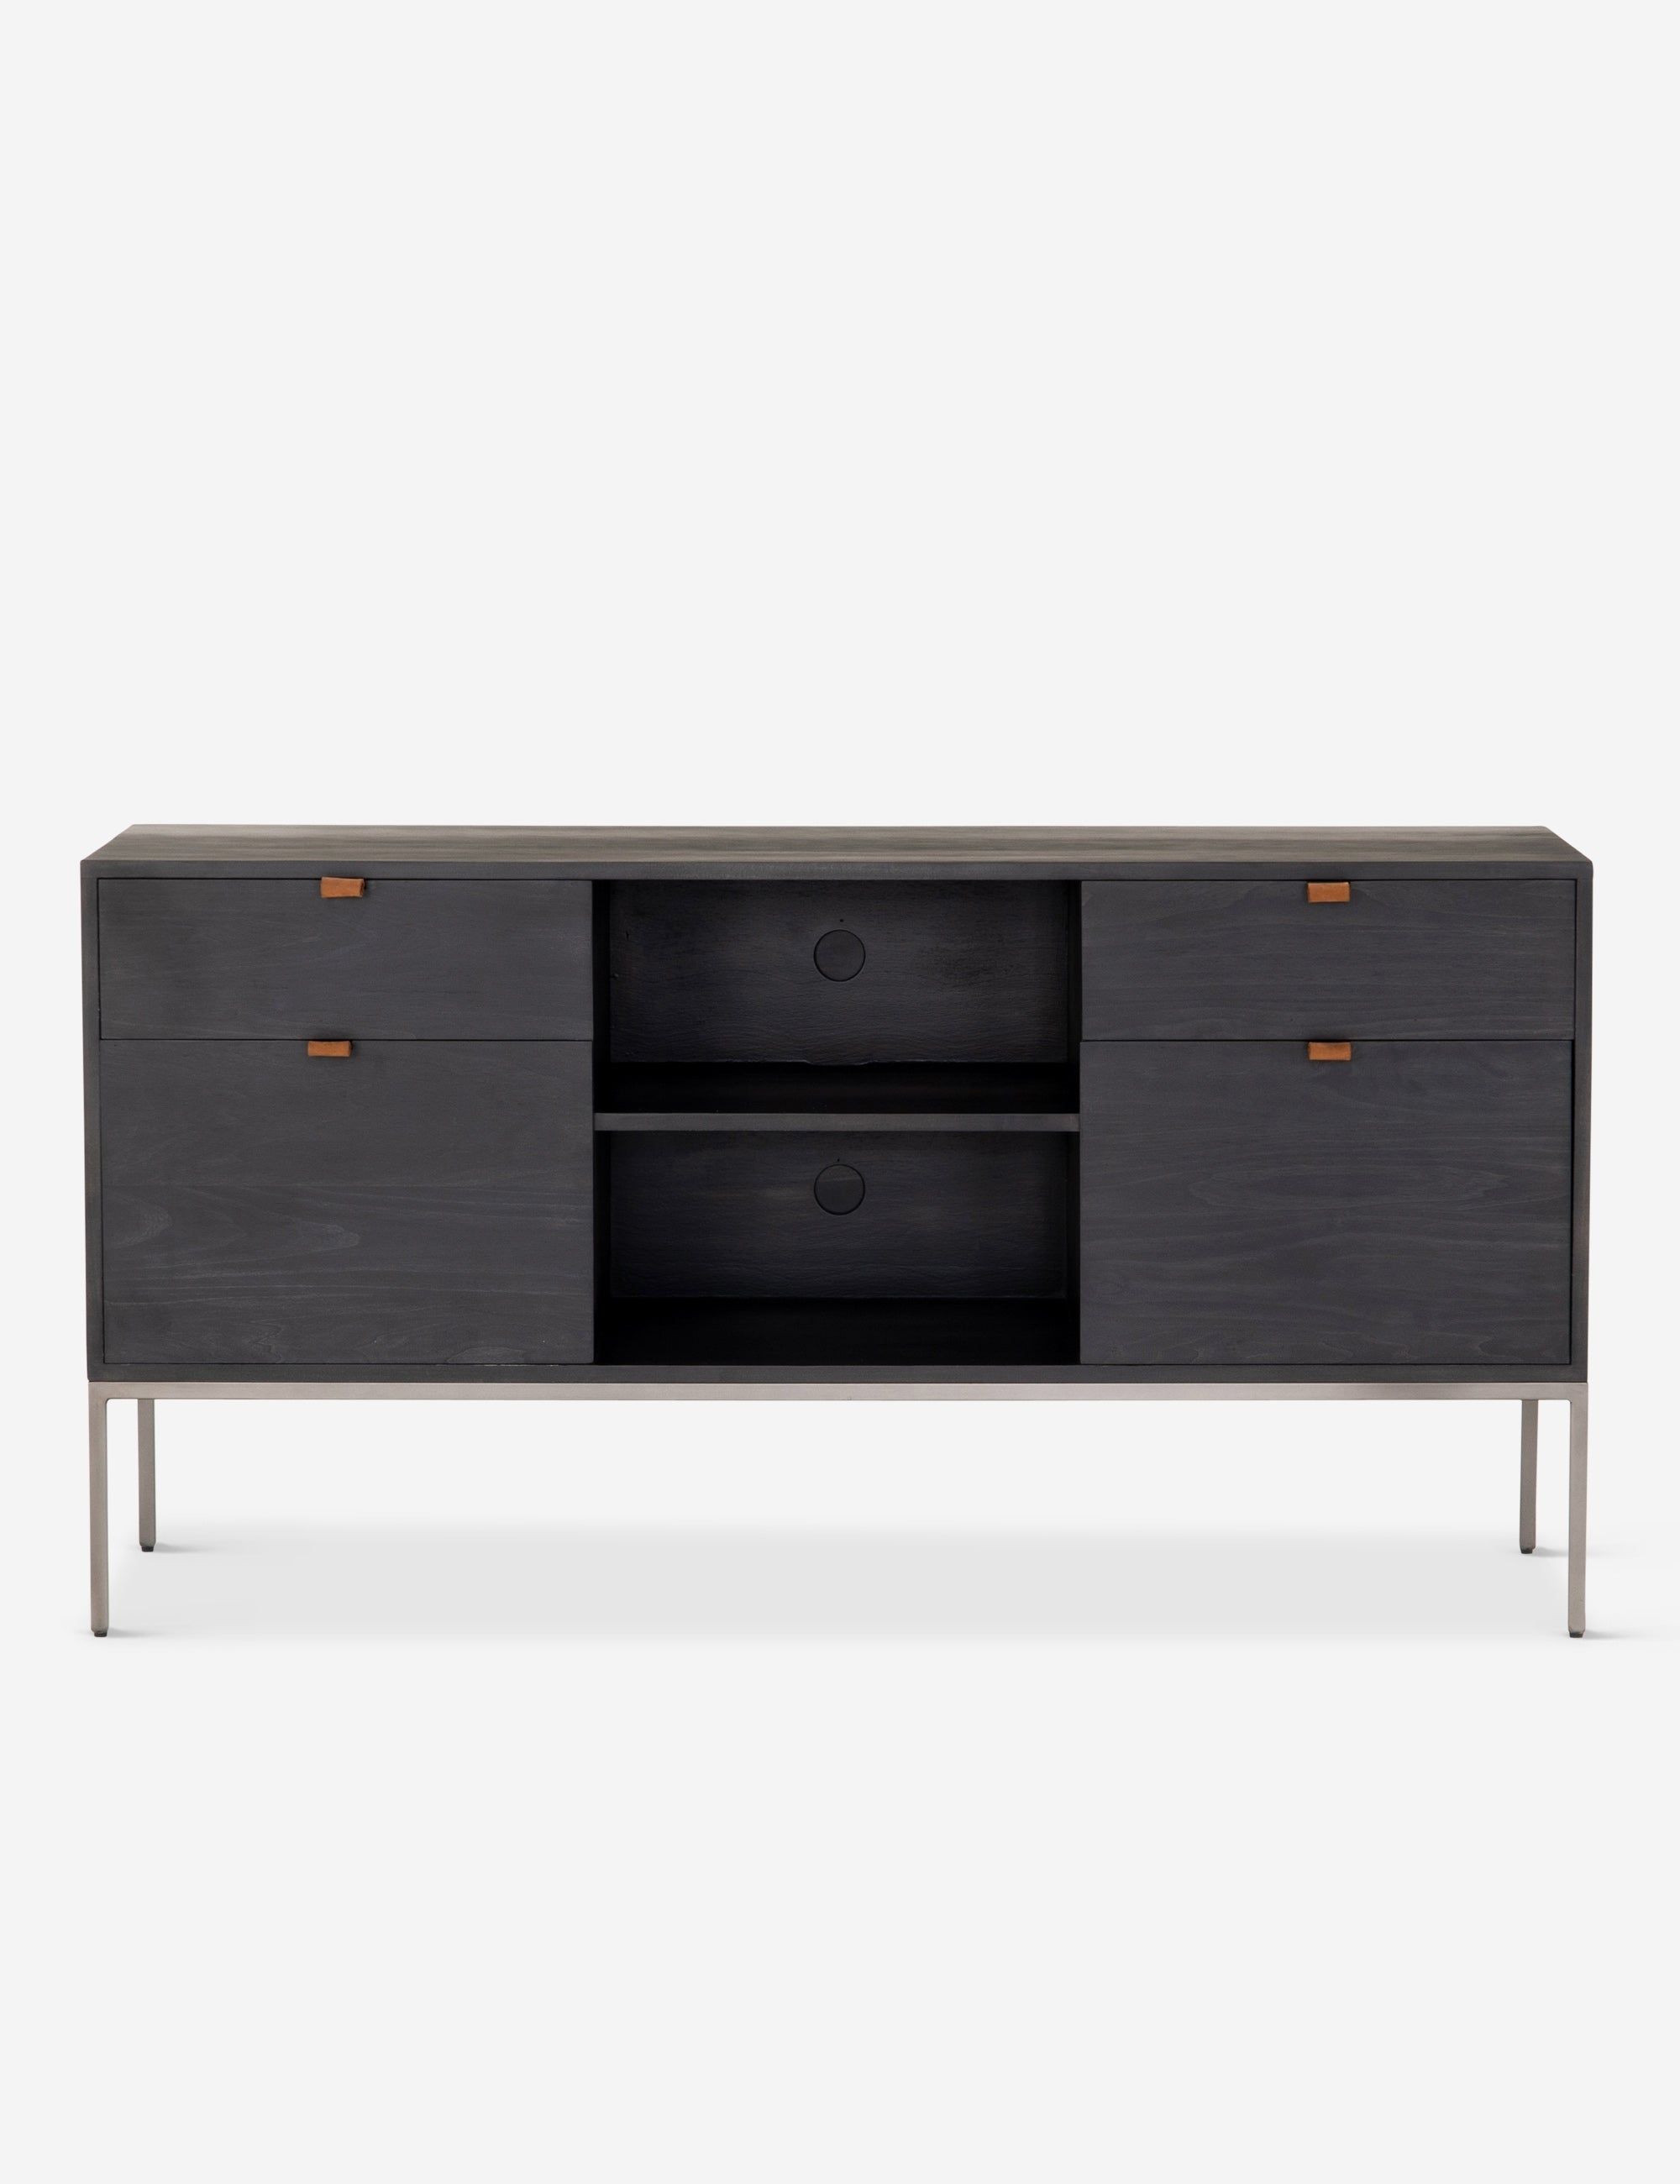 Contemporary Black Washed Poplar 4-Drawer Credenza with Toffee Leather Pulls